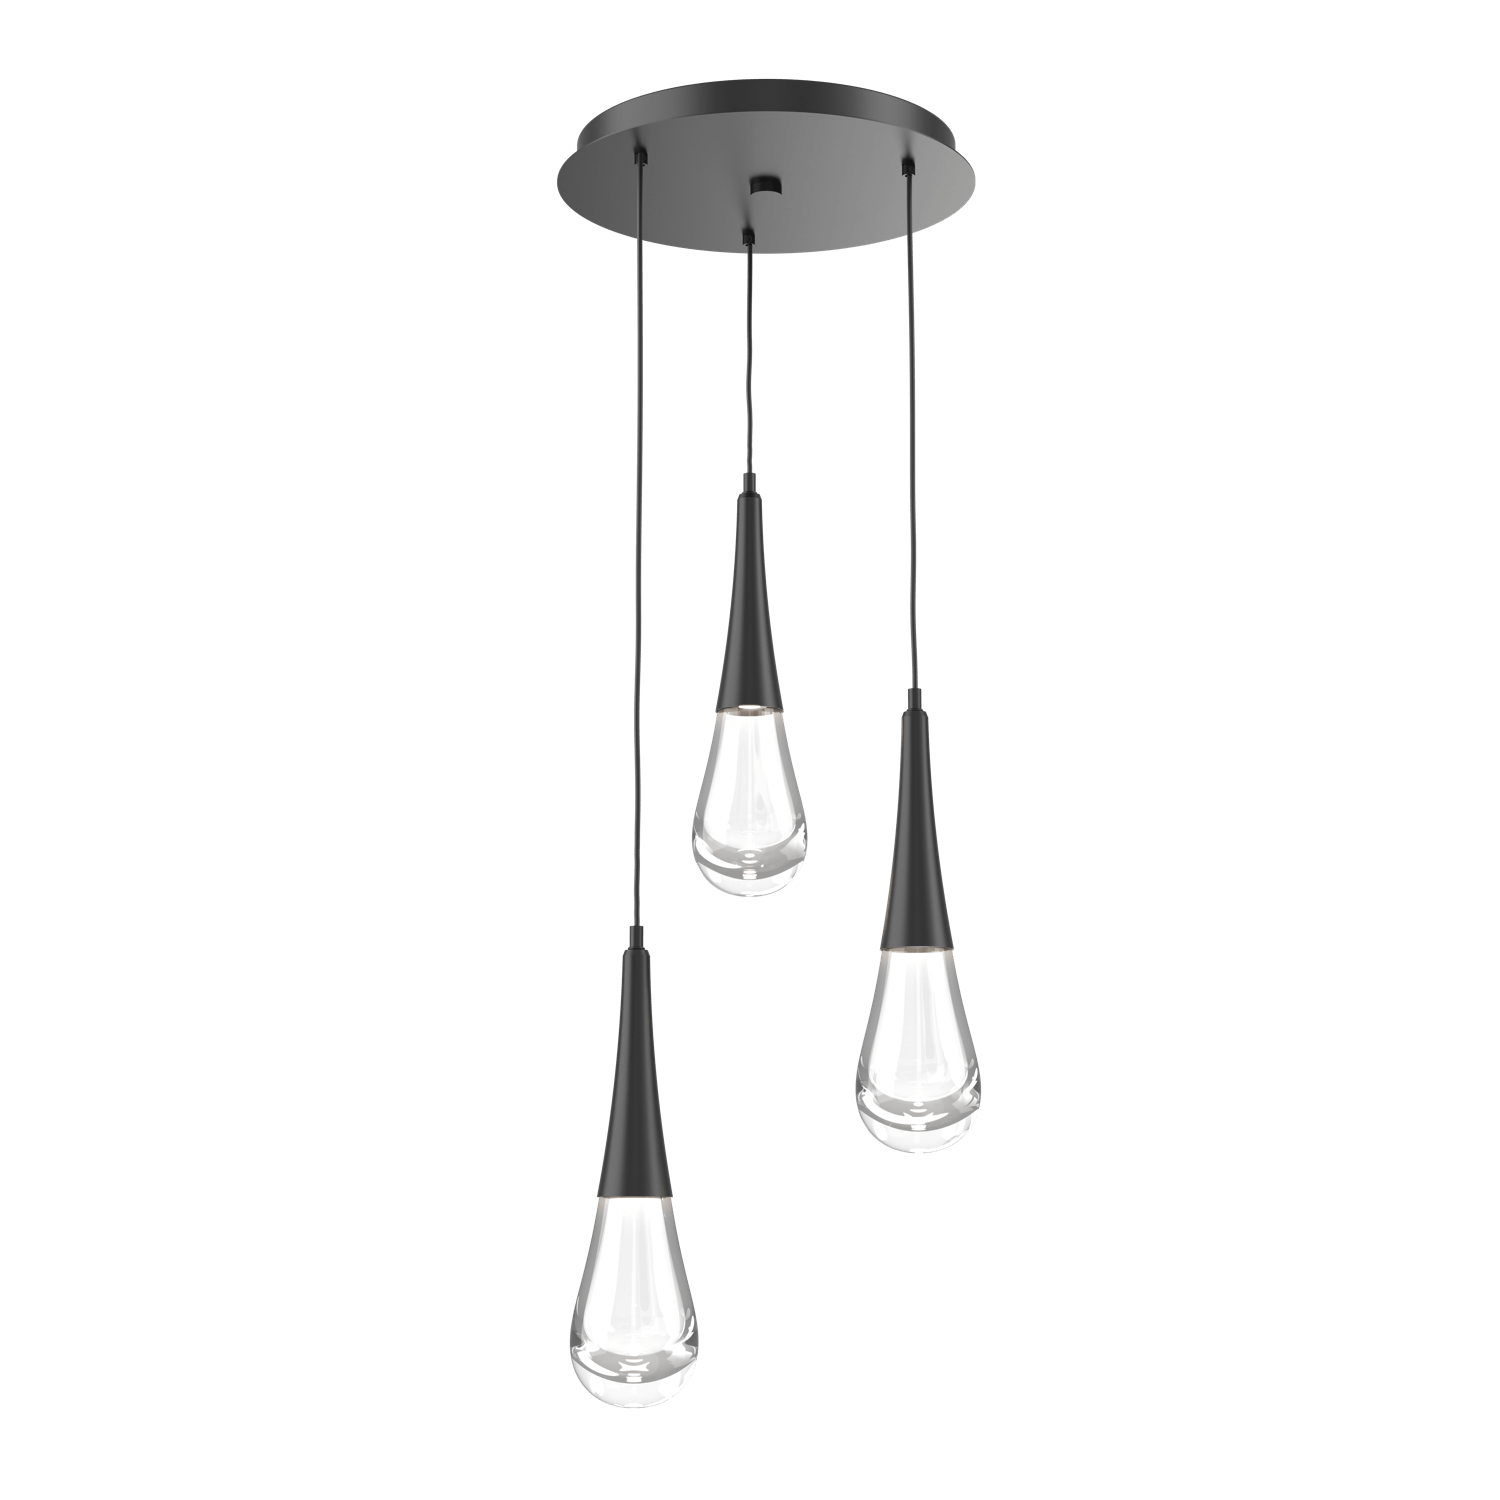 CHB0078-03-MB-Hammerton-Studio-Raindrop-3-light-round-pendant-chandelier-with-matte-black-finish-and-clear-blown-glass-shades-and-LED-lamping